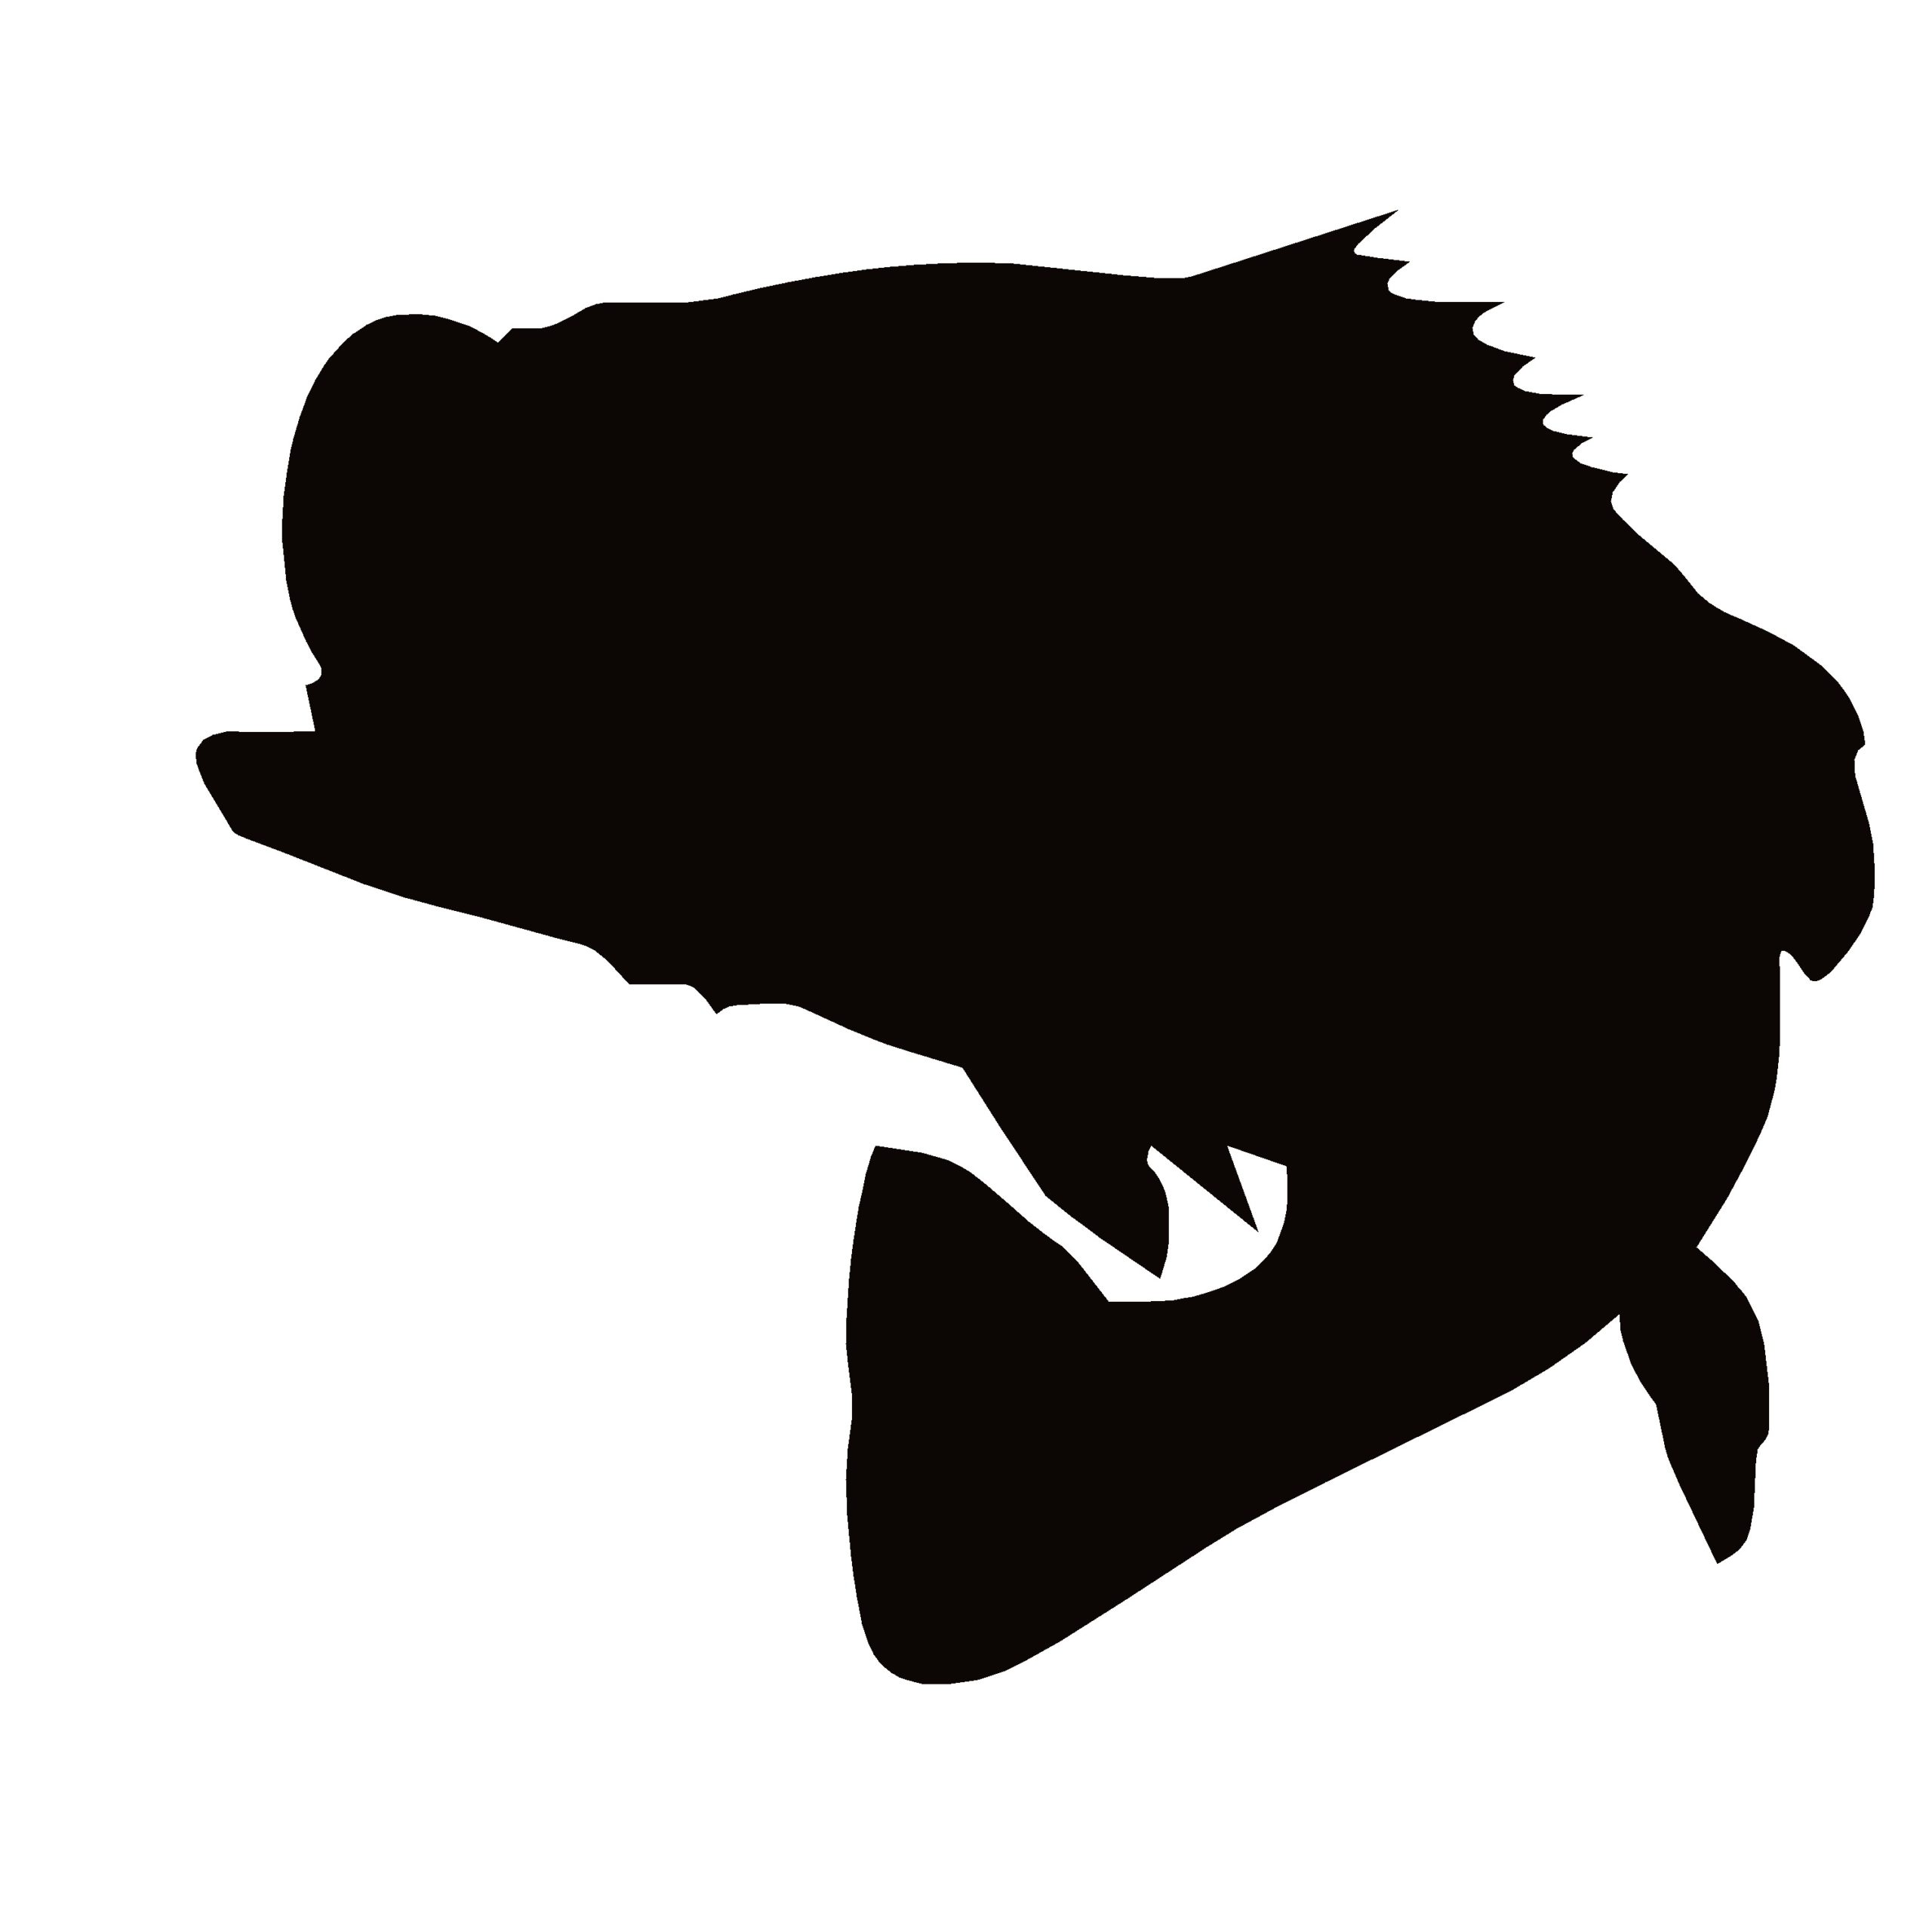 Large Mouth Bass Decal - Large Mouth Bass Fishing Decal